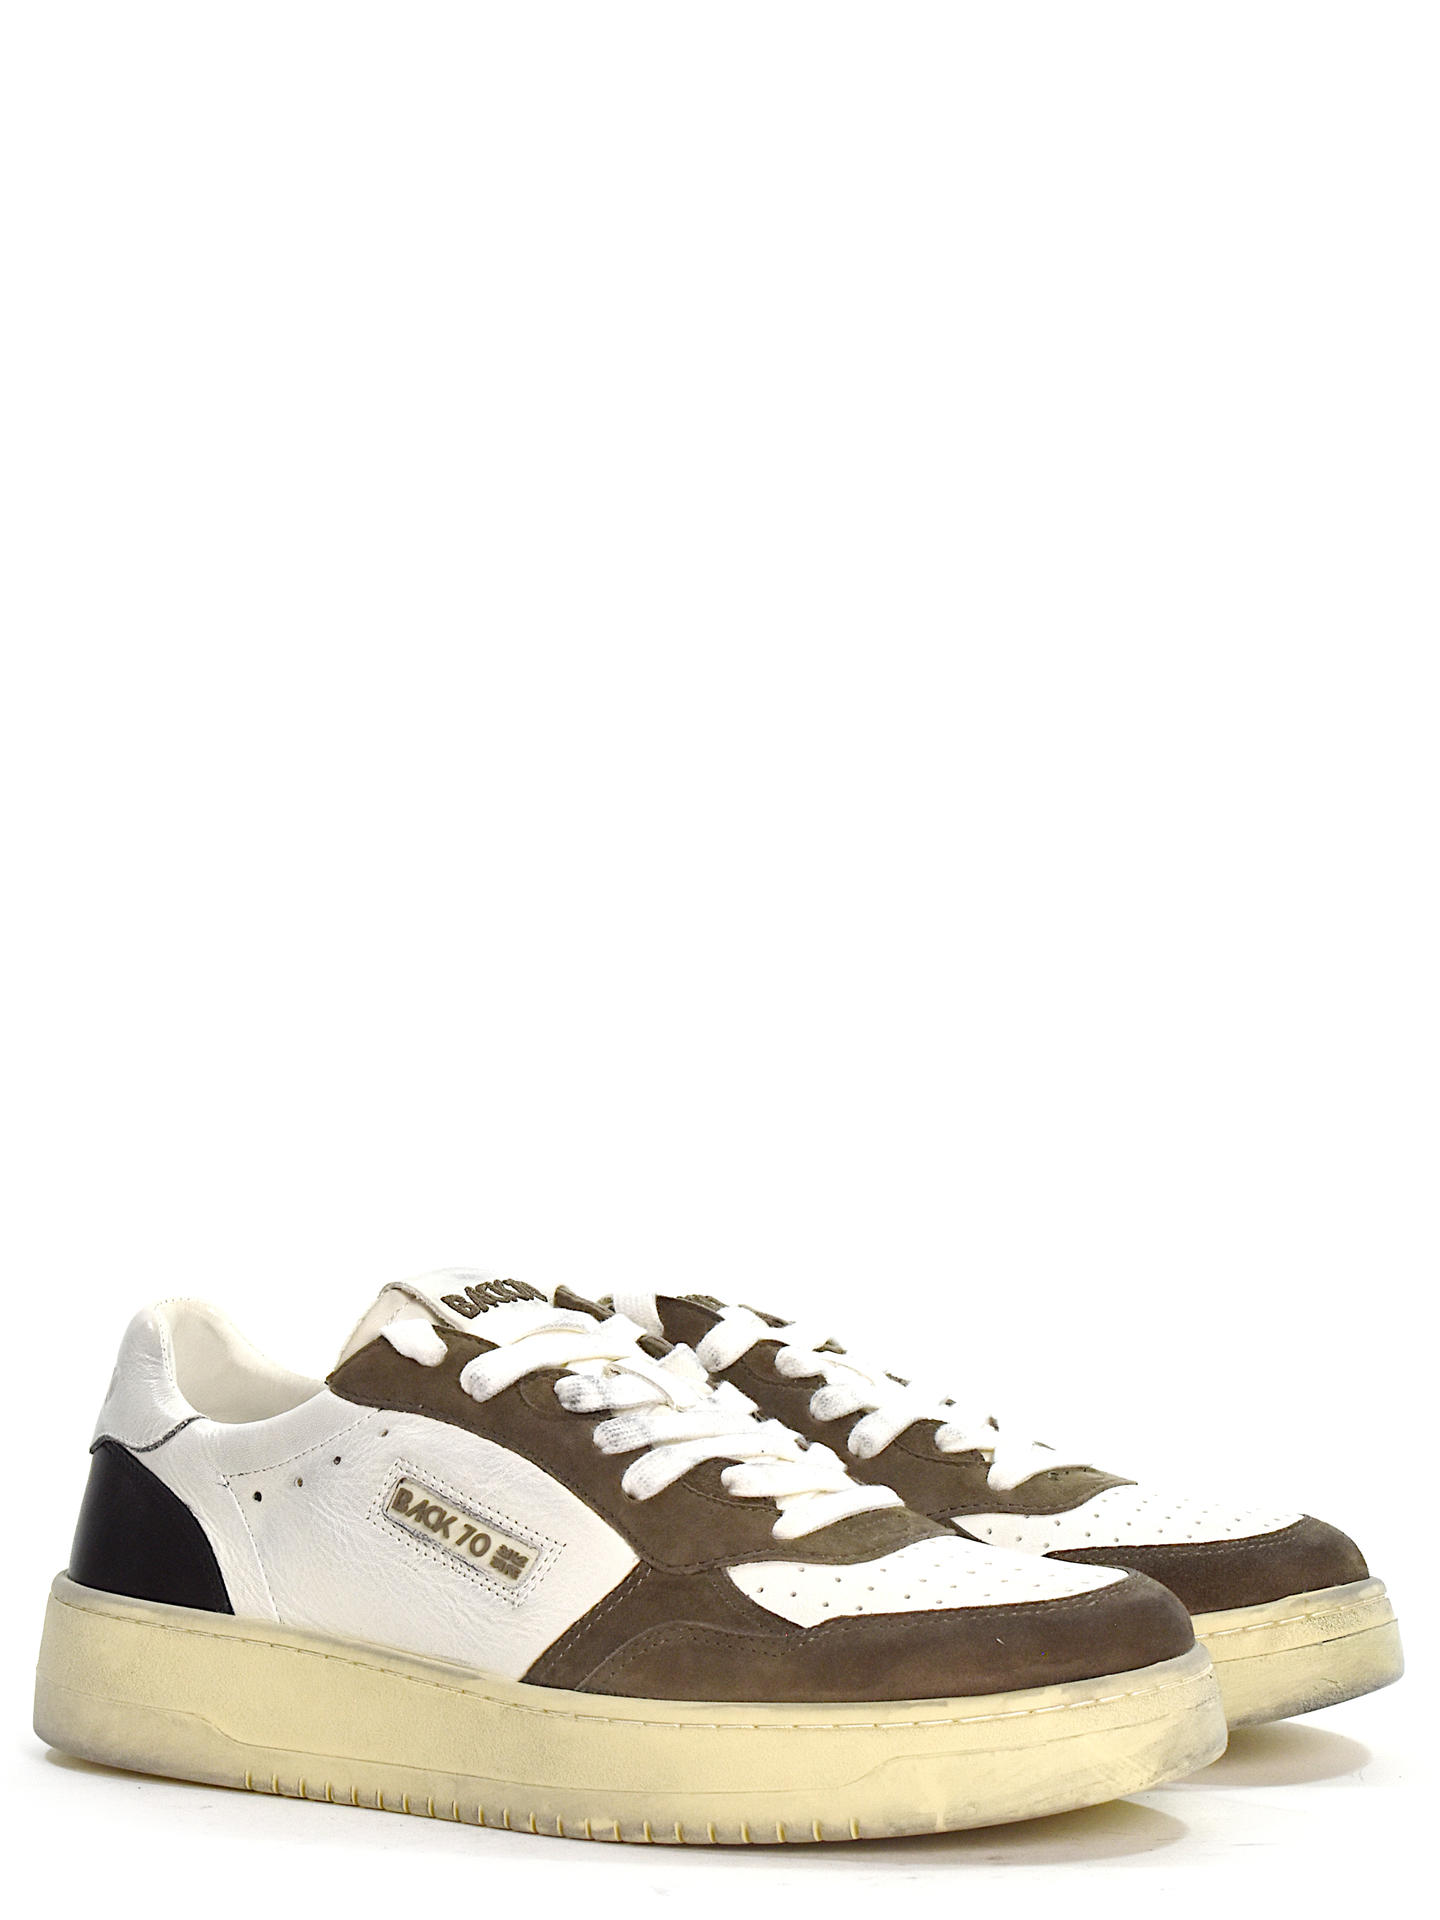 SNEAKERS BACK 70 1QV8 TAUPE